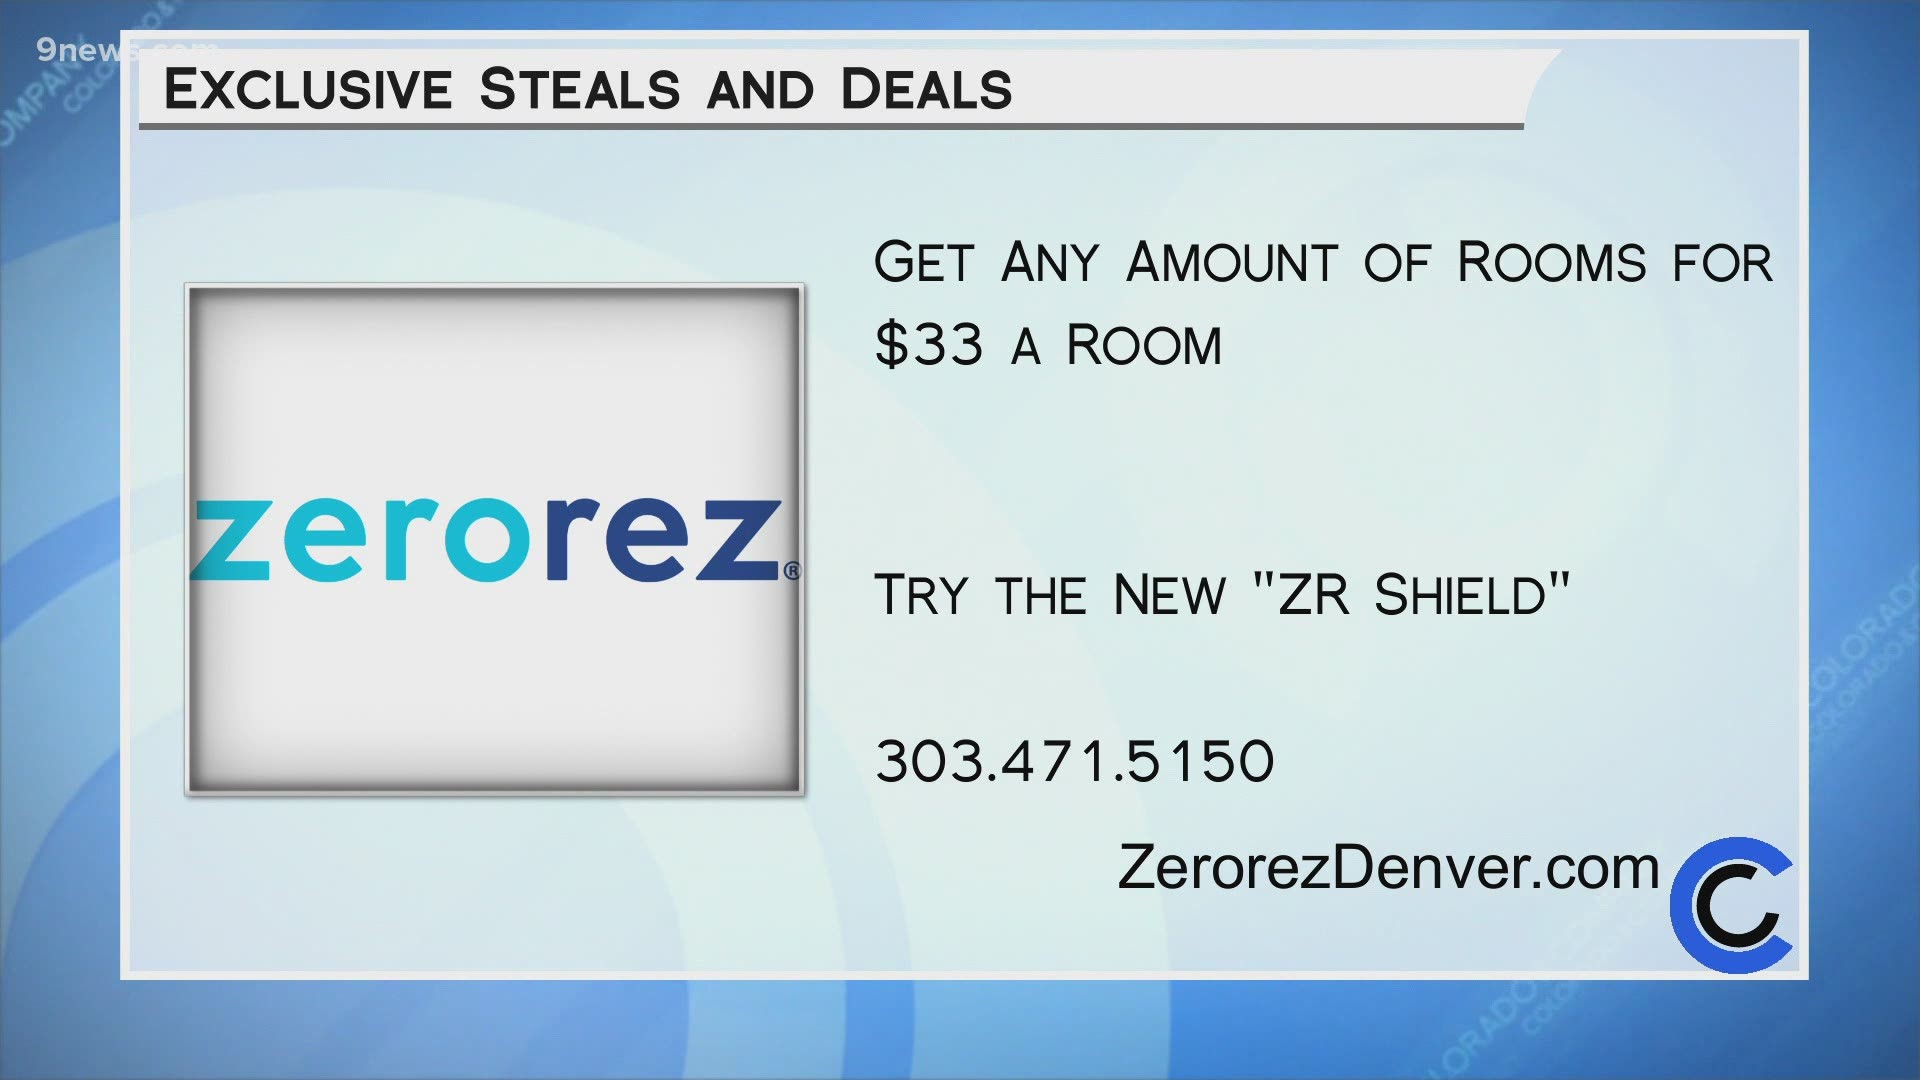 Keep your carpets cleaner longer. Clean any number of rooms for just $33 each! Learn more at ZerorezDenver.com or call 303.471.5150.